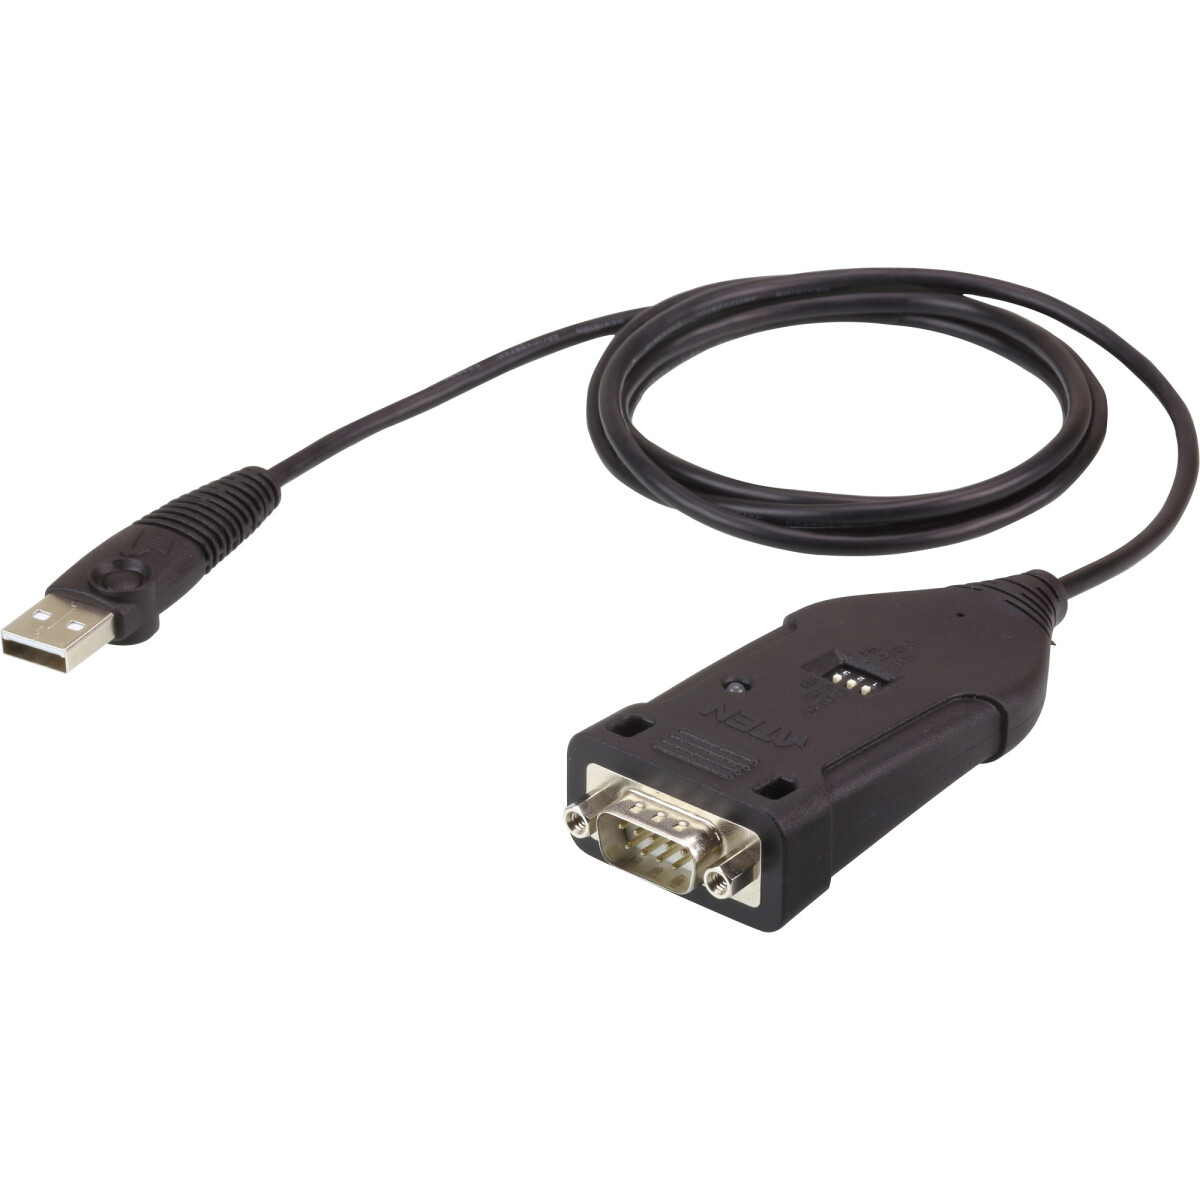 ATEN UC485 USB to RS-422/485 Adapter Cable, 1.2m